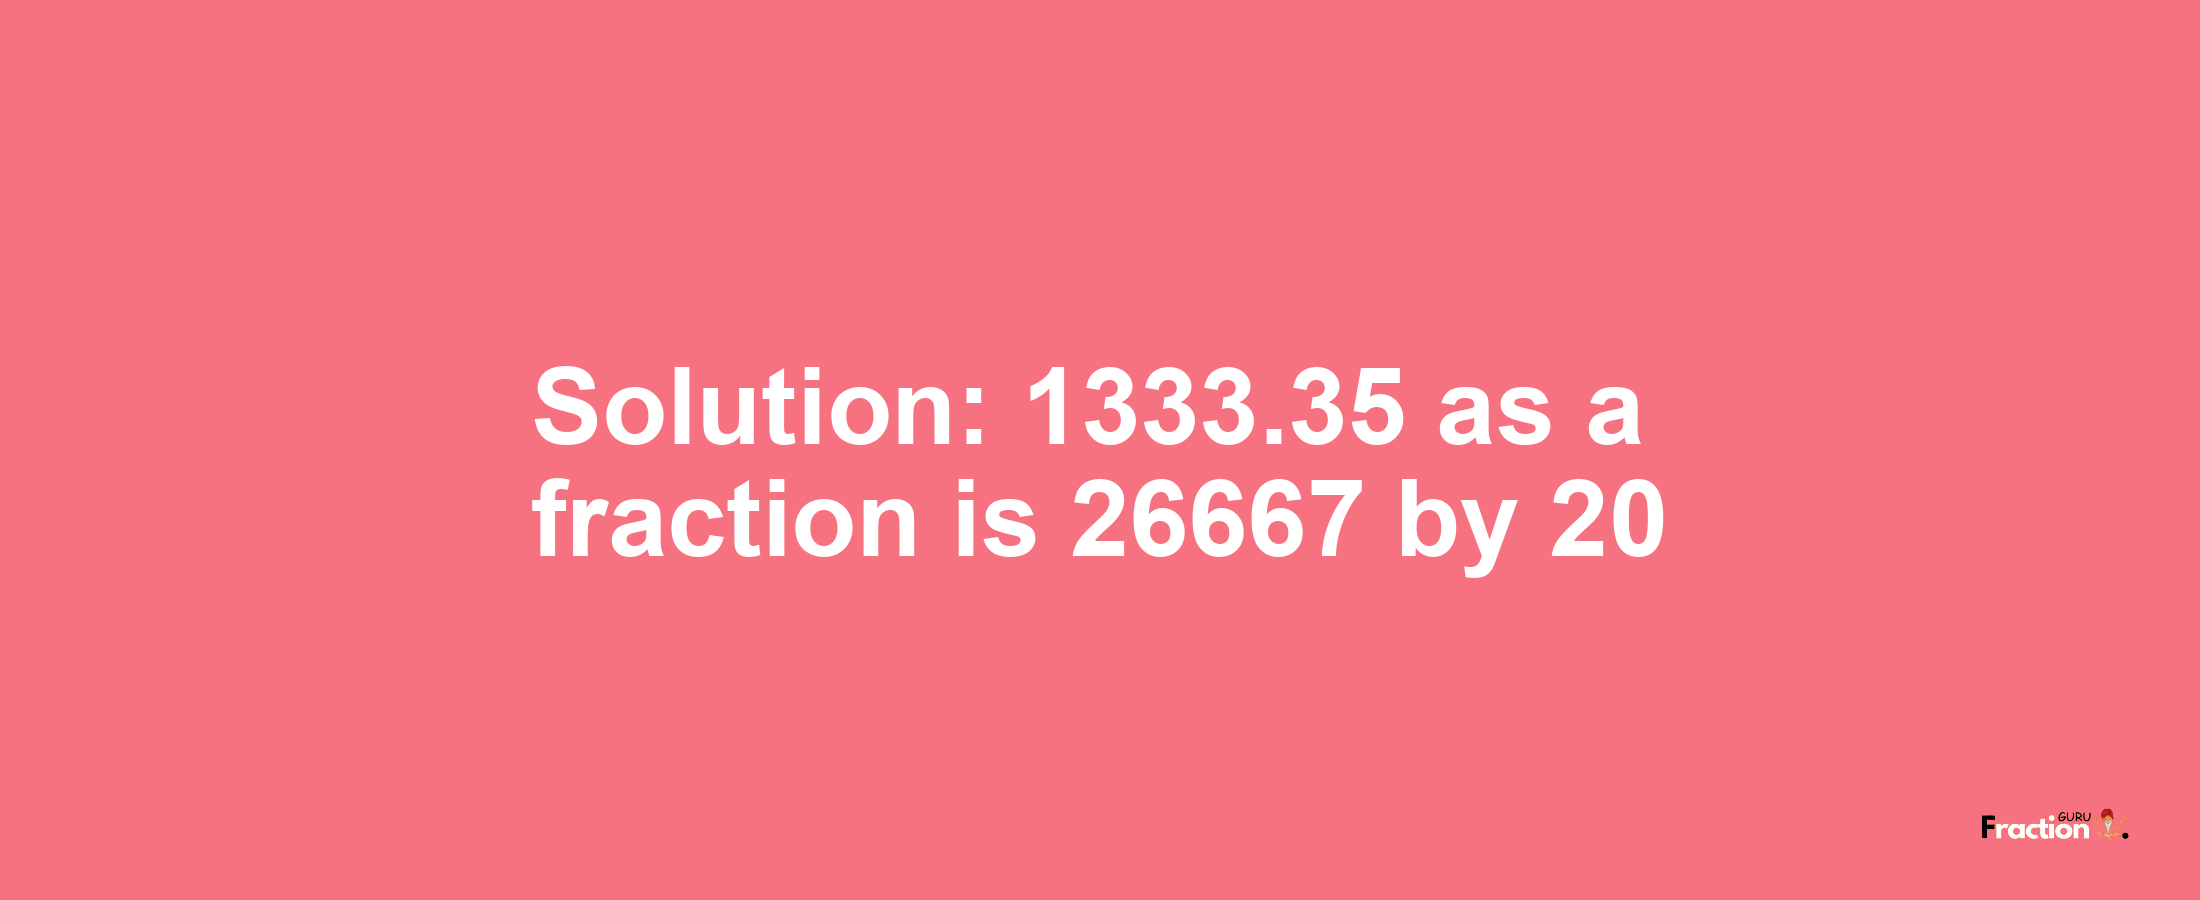 Solution:1333.35 as a fraction is 26667/20